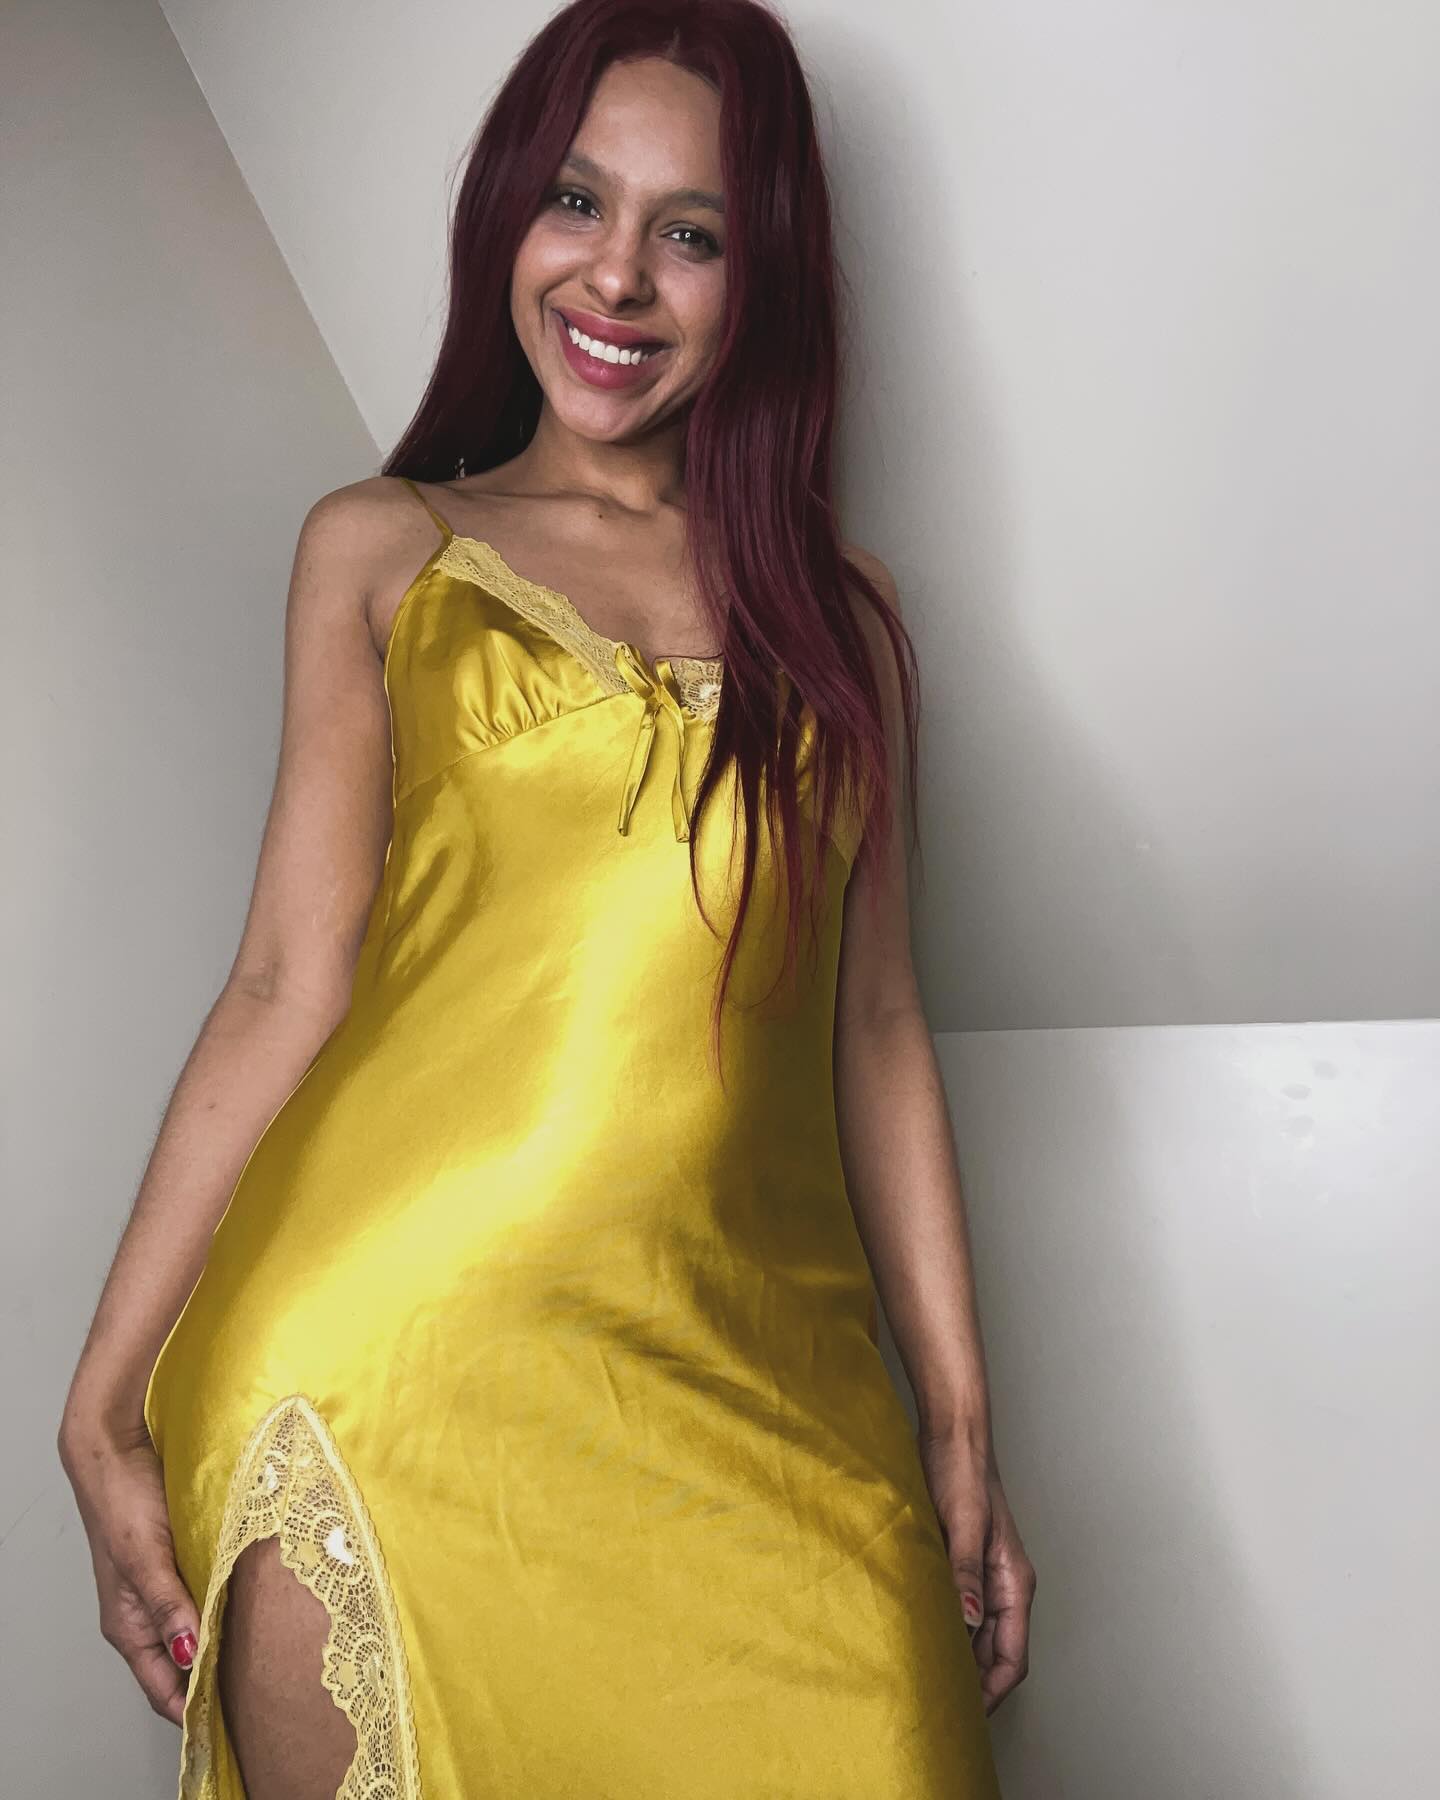 Be the ray of sunshine and brighten someone’s day ! This is why I love what I do I love connecting and making people smile …did I make you smile today.? ………………………..#levelup #creators #babesofinstagram #hustle #wakeup #stonerbabe #420 #yellow #smile😊 #sunshine ine